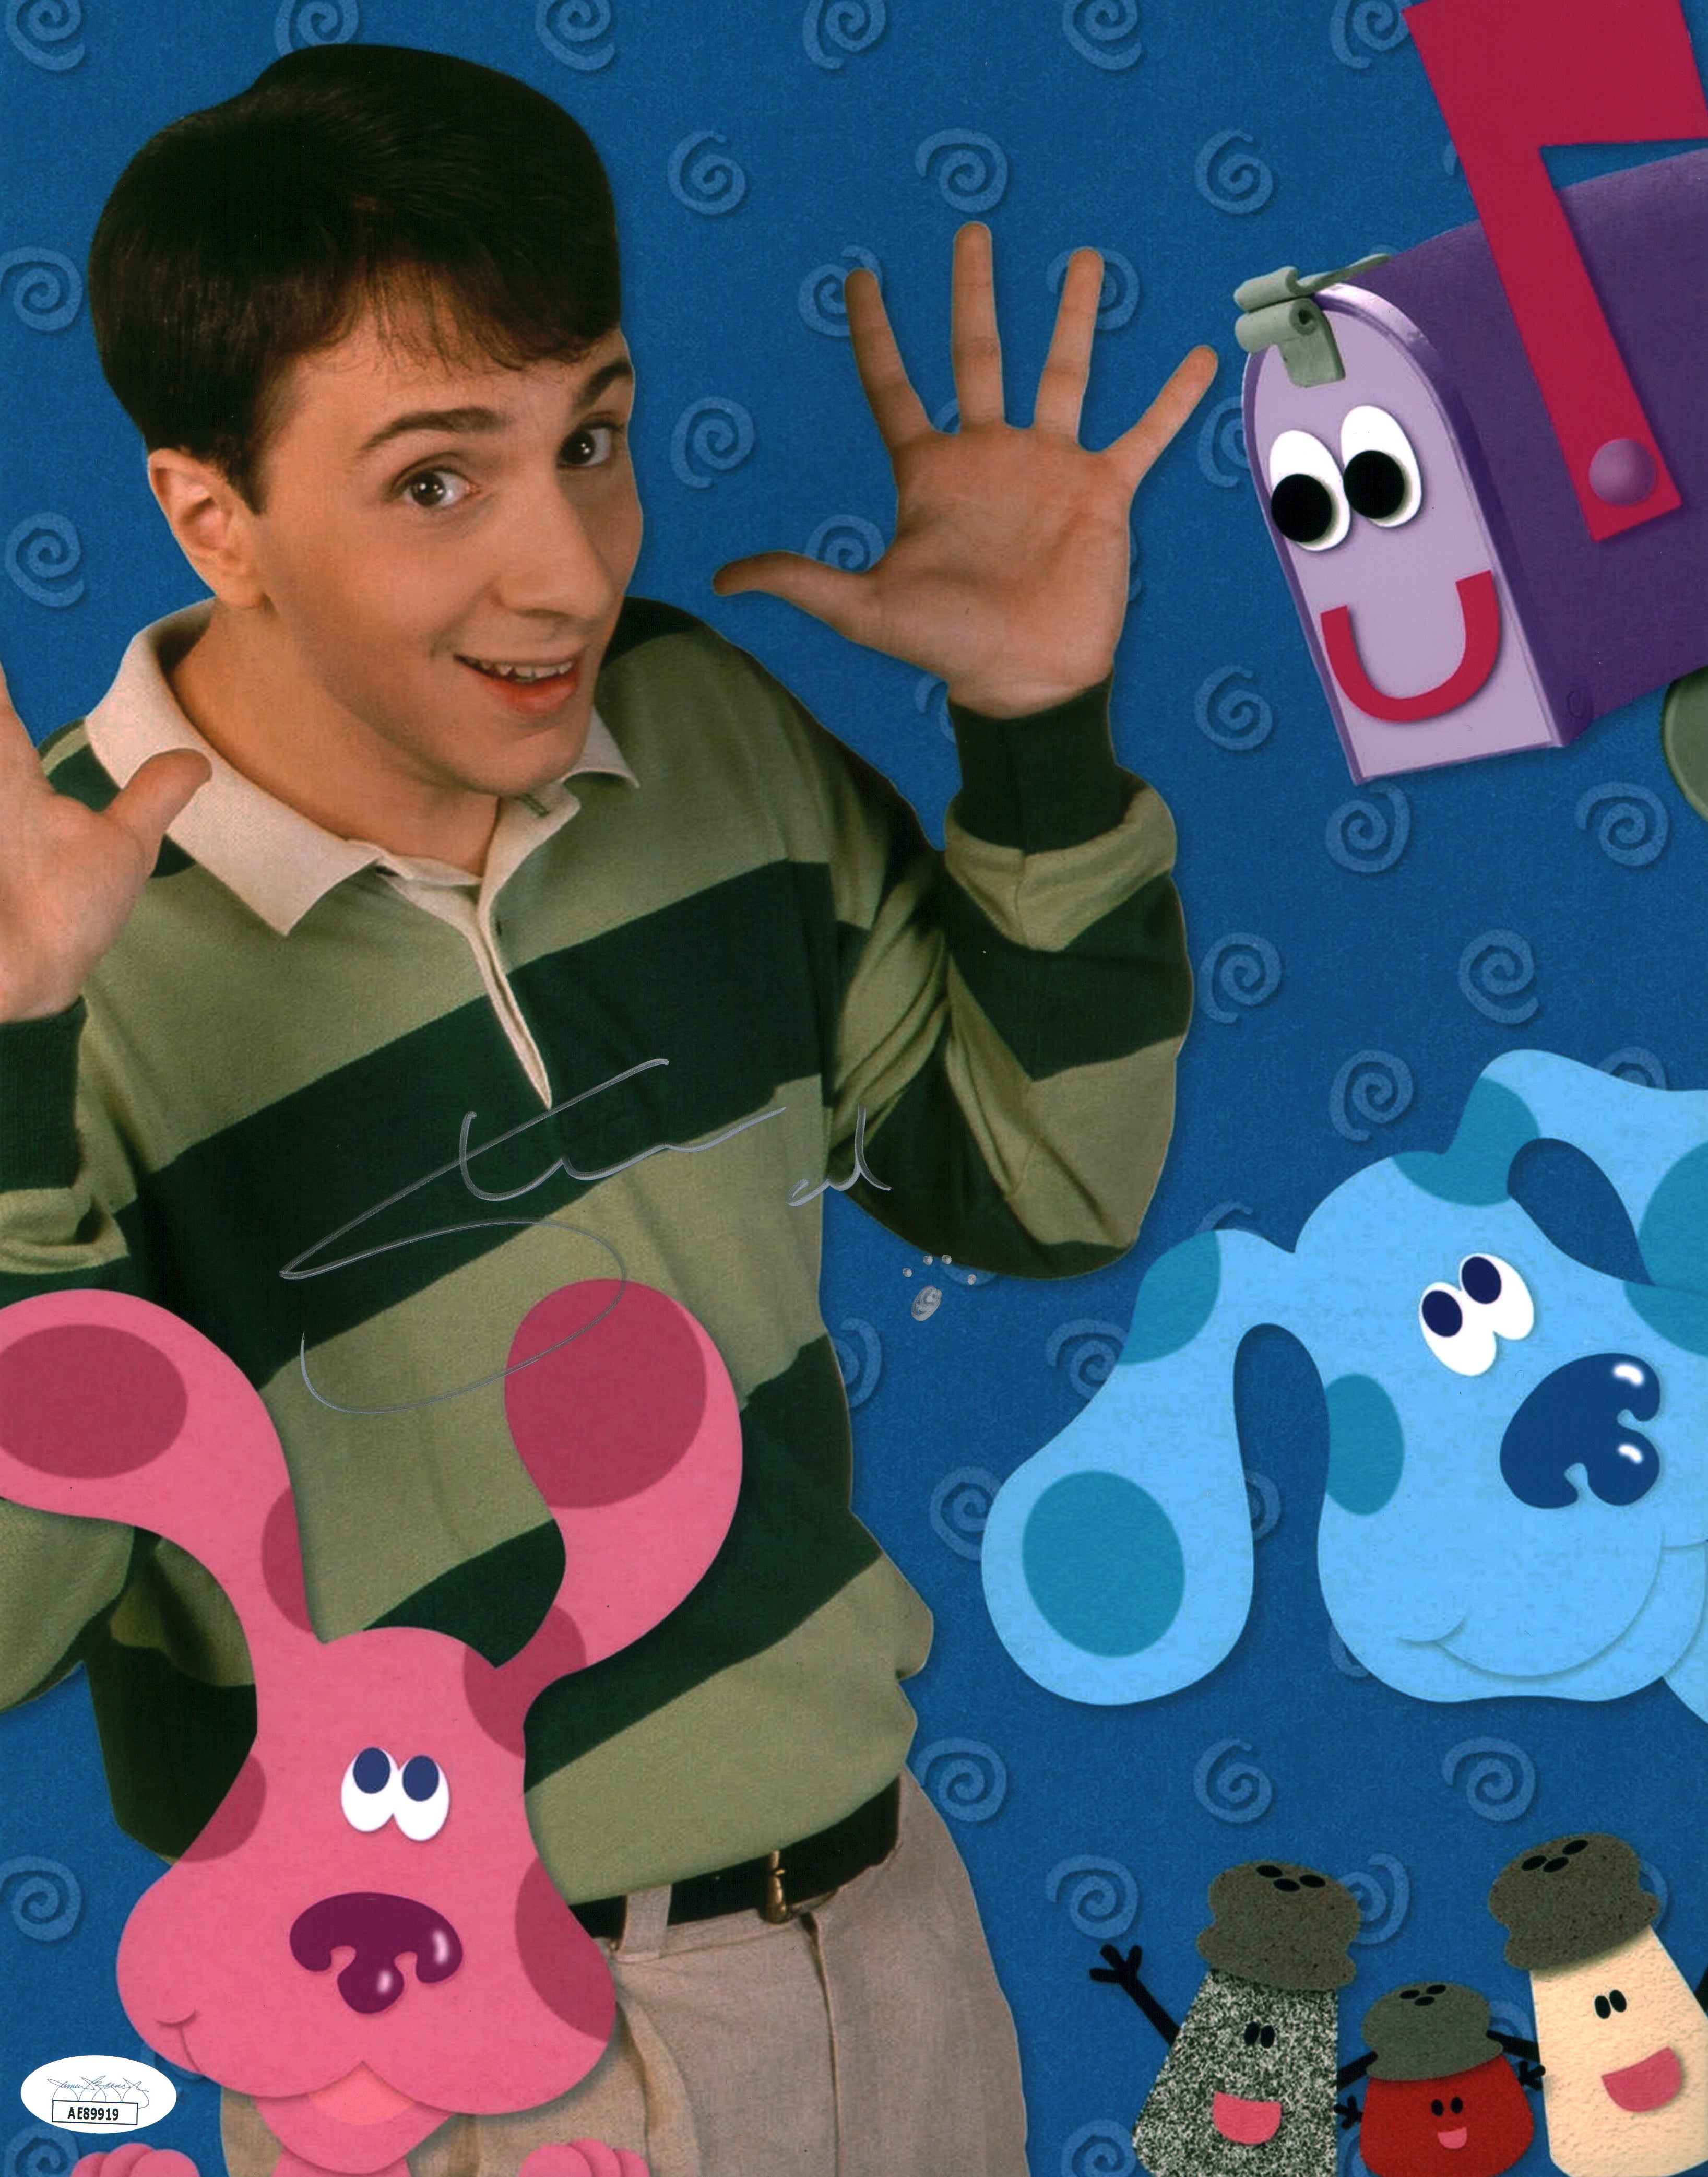 Steve Burns Blues Clues 11x14 Signed Photo Poster JSA  Certified Autograph GalaxyCon